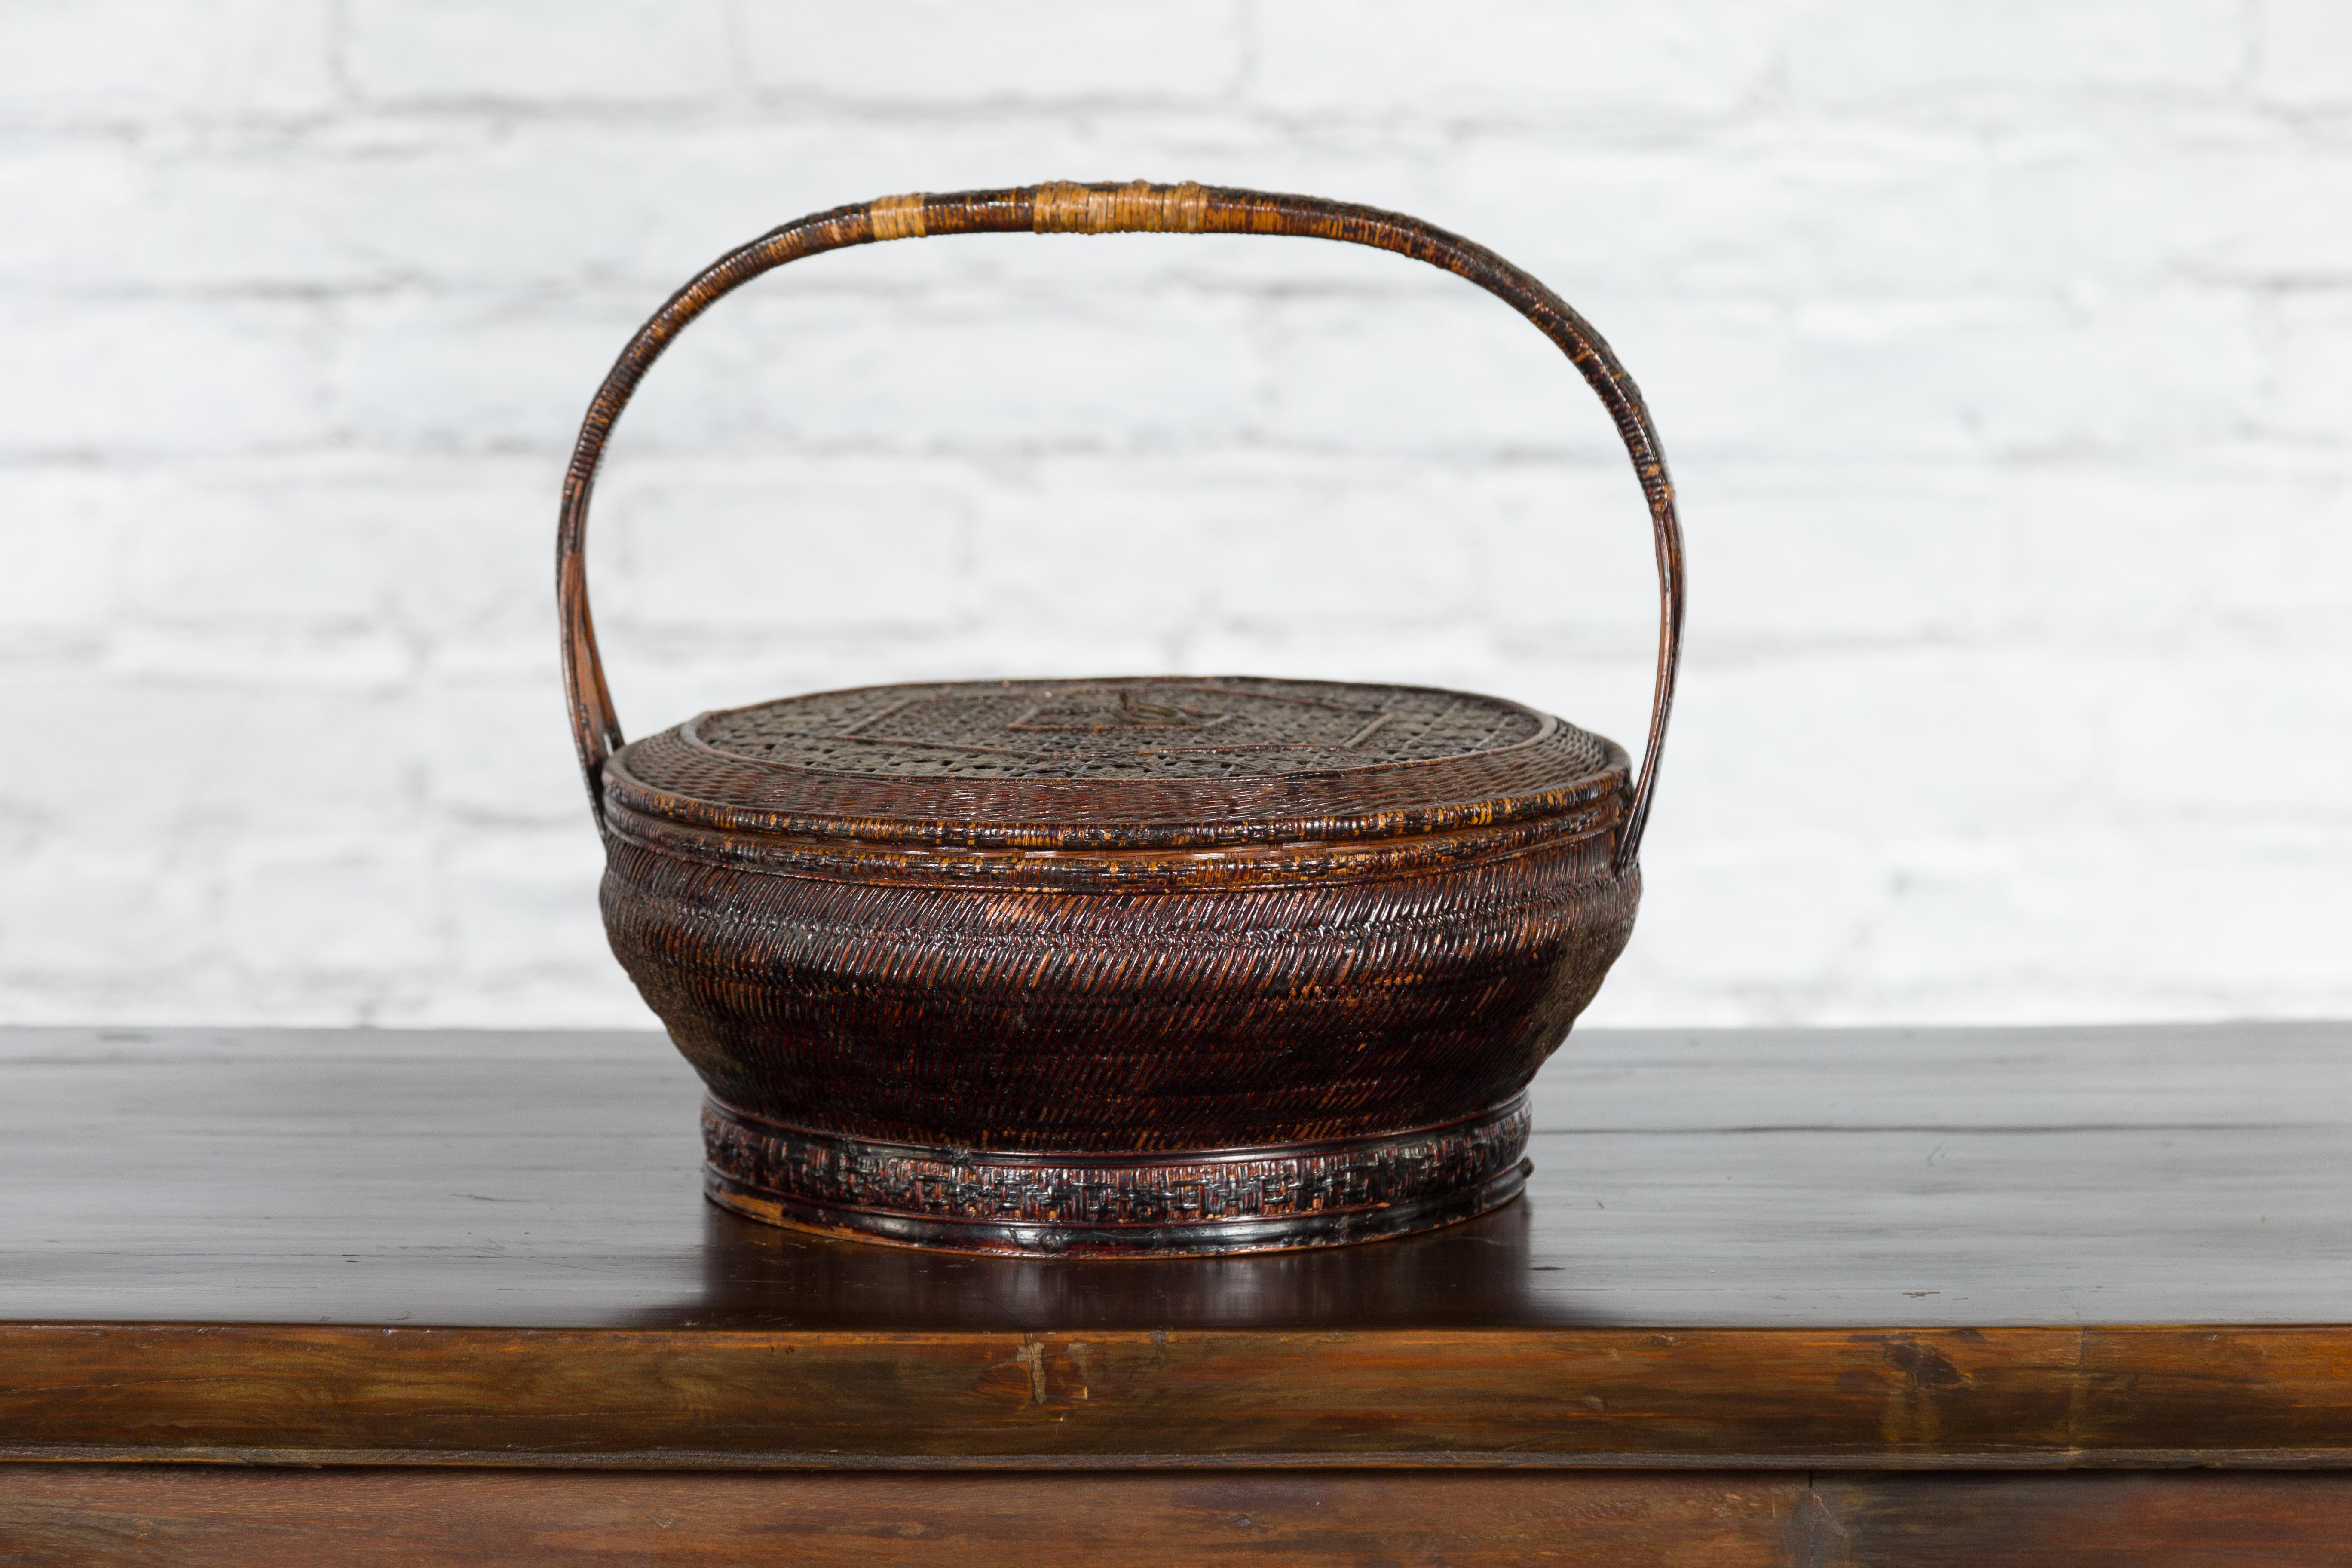 A small Chinese Qing Dynasty period basket from the 19th century hand-woven with rattan on a bamboo armature. Created in China during the Qing Dynasty, this rustic basket features a circular top adorned with hexagonal concentric motifs, surrounding